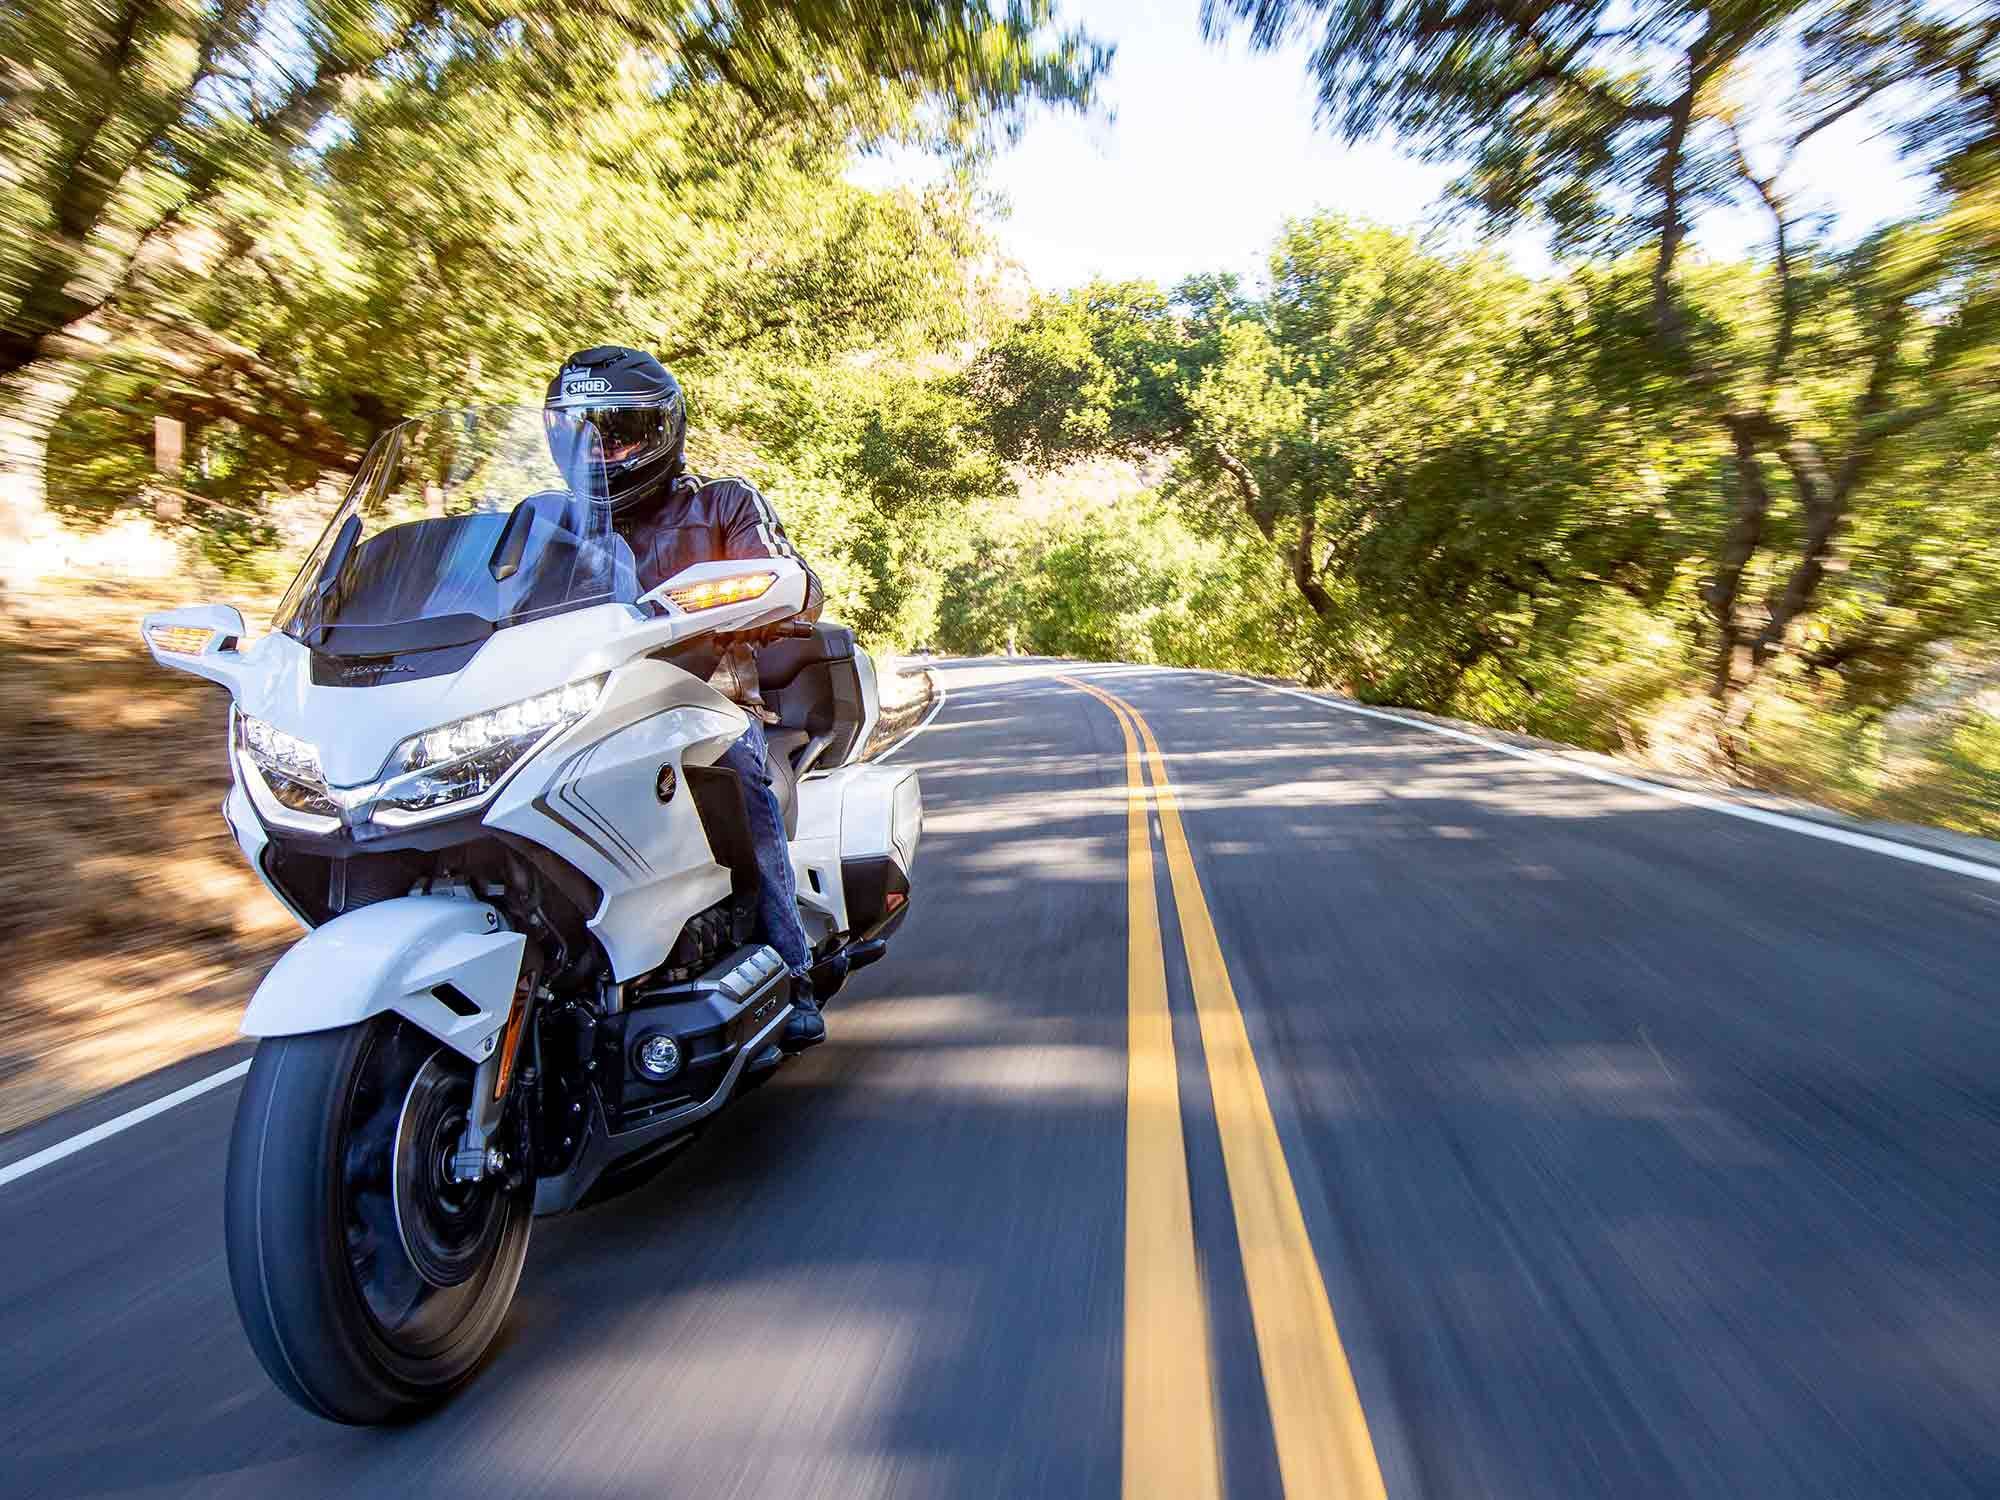 Its combination of sportiness, comfort, capability, and ease of use make the Honda Gold Wing one of the greatest touring motorcycles ever made.